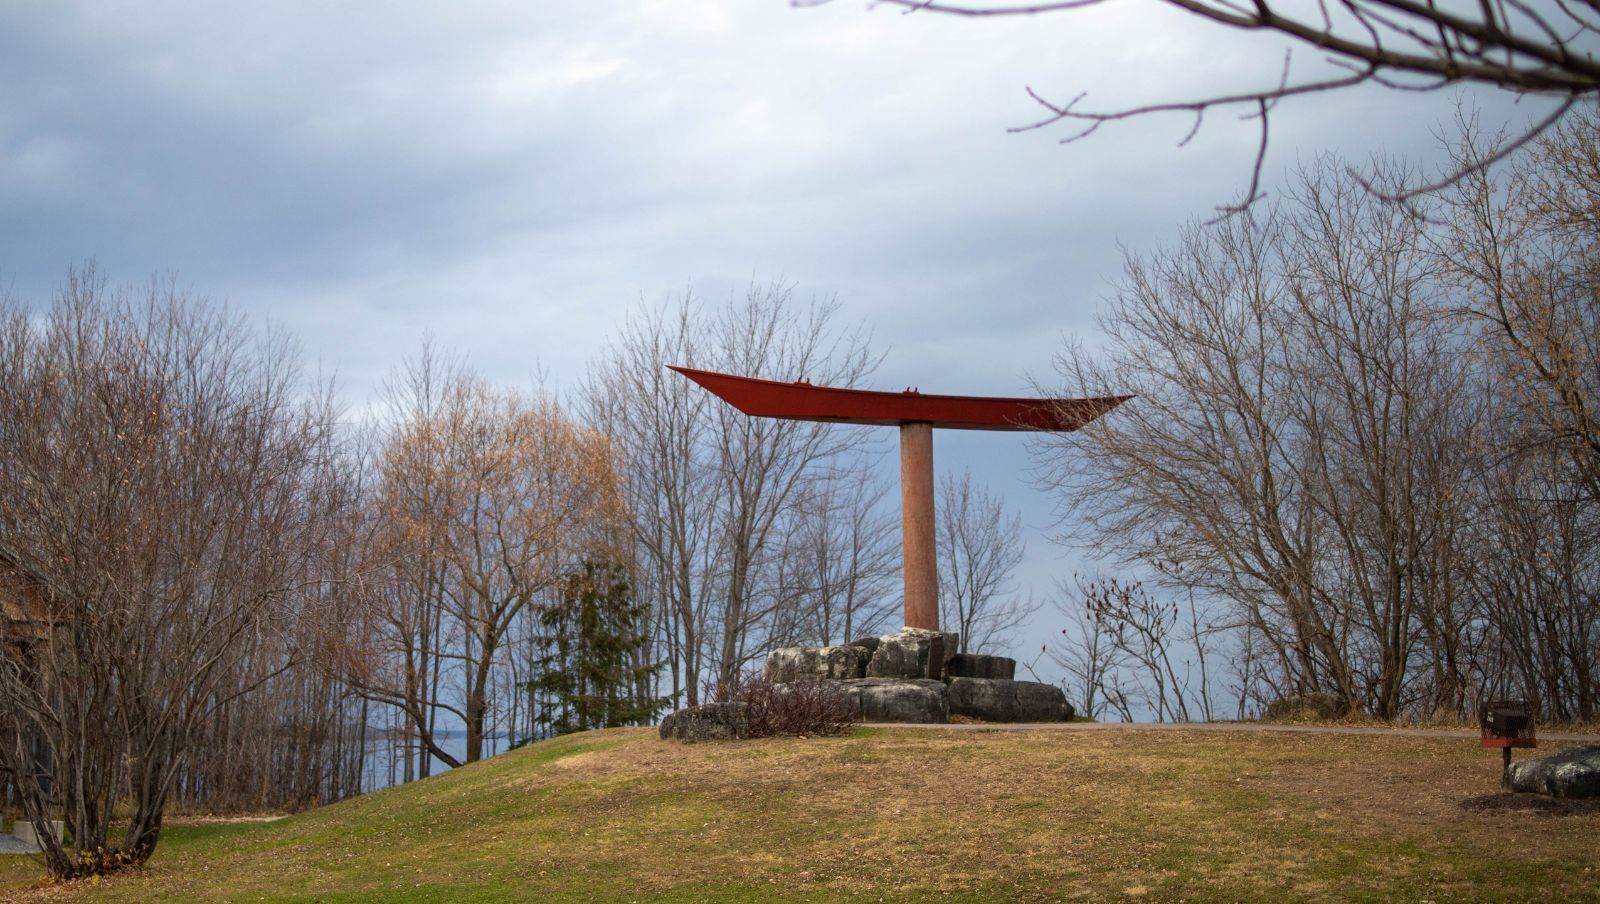 The Pembroke Waterfront. The Pointer Boat Monument sits in front of trees in autumn.